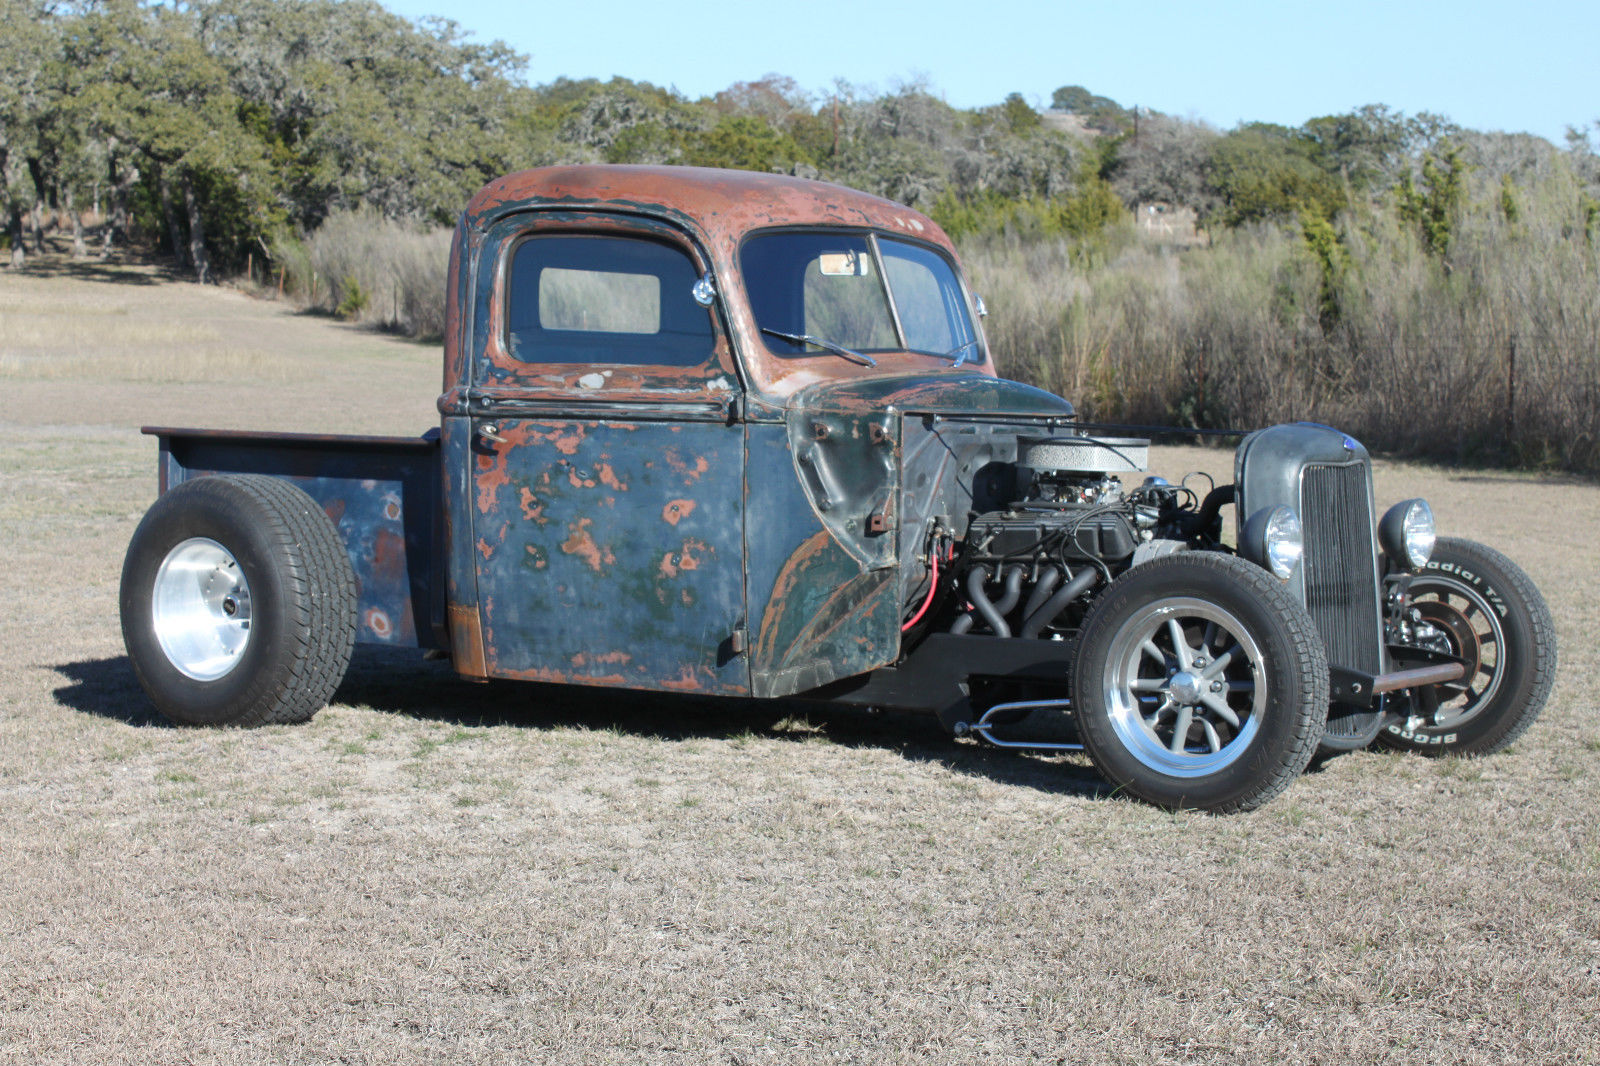 Ford Hot Rod Bobber Rat Rod Pick Up Truck For Sale Photos | My XXX Hot Girl